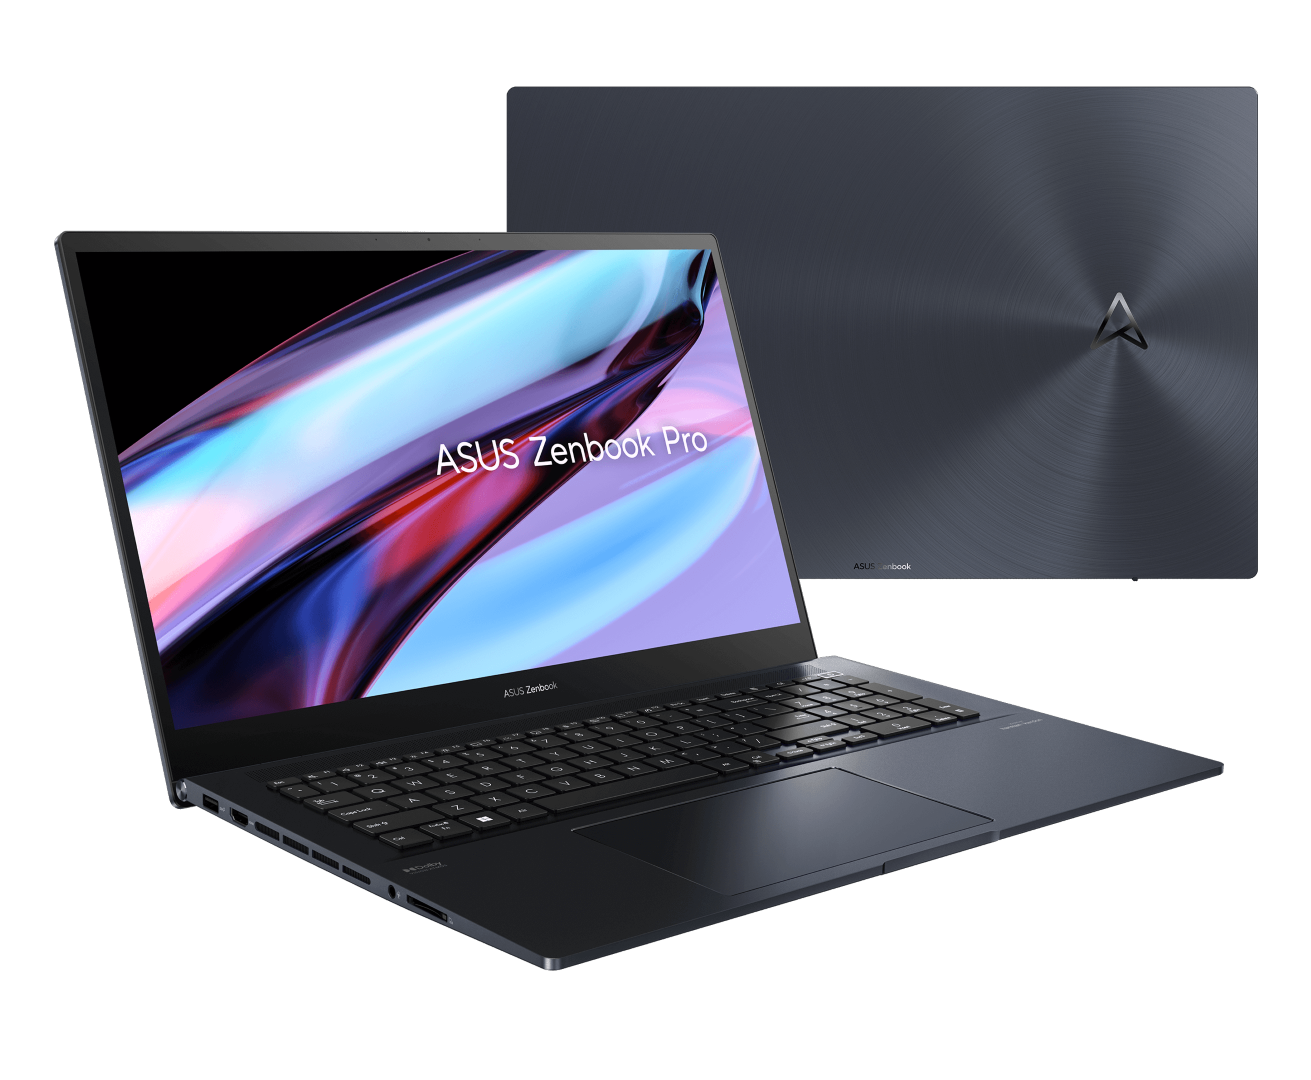 The amazing potential of Asus Zenbook Pro 17